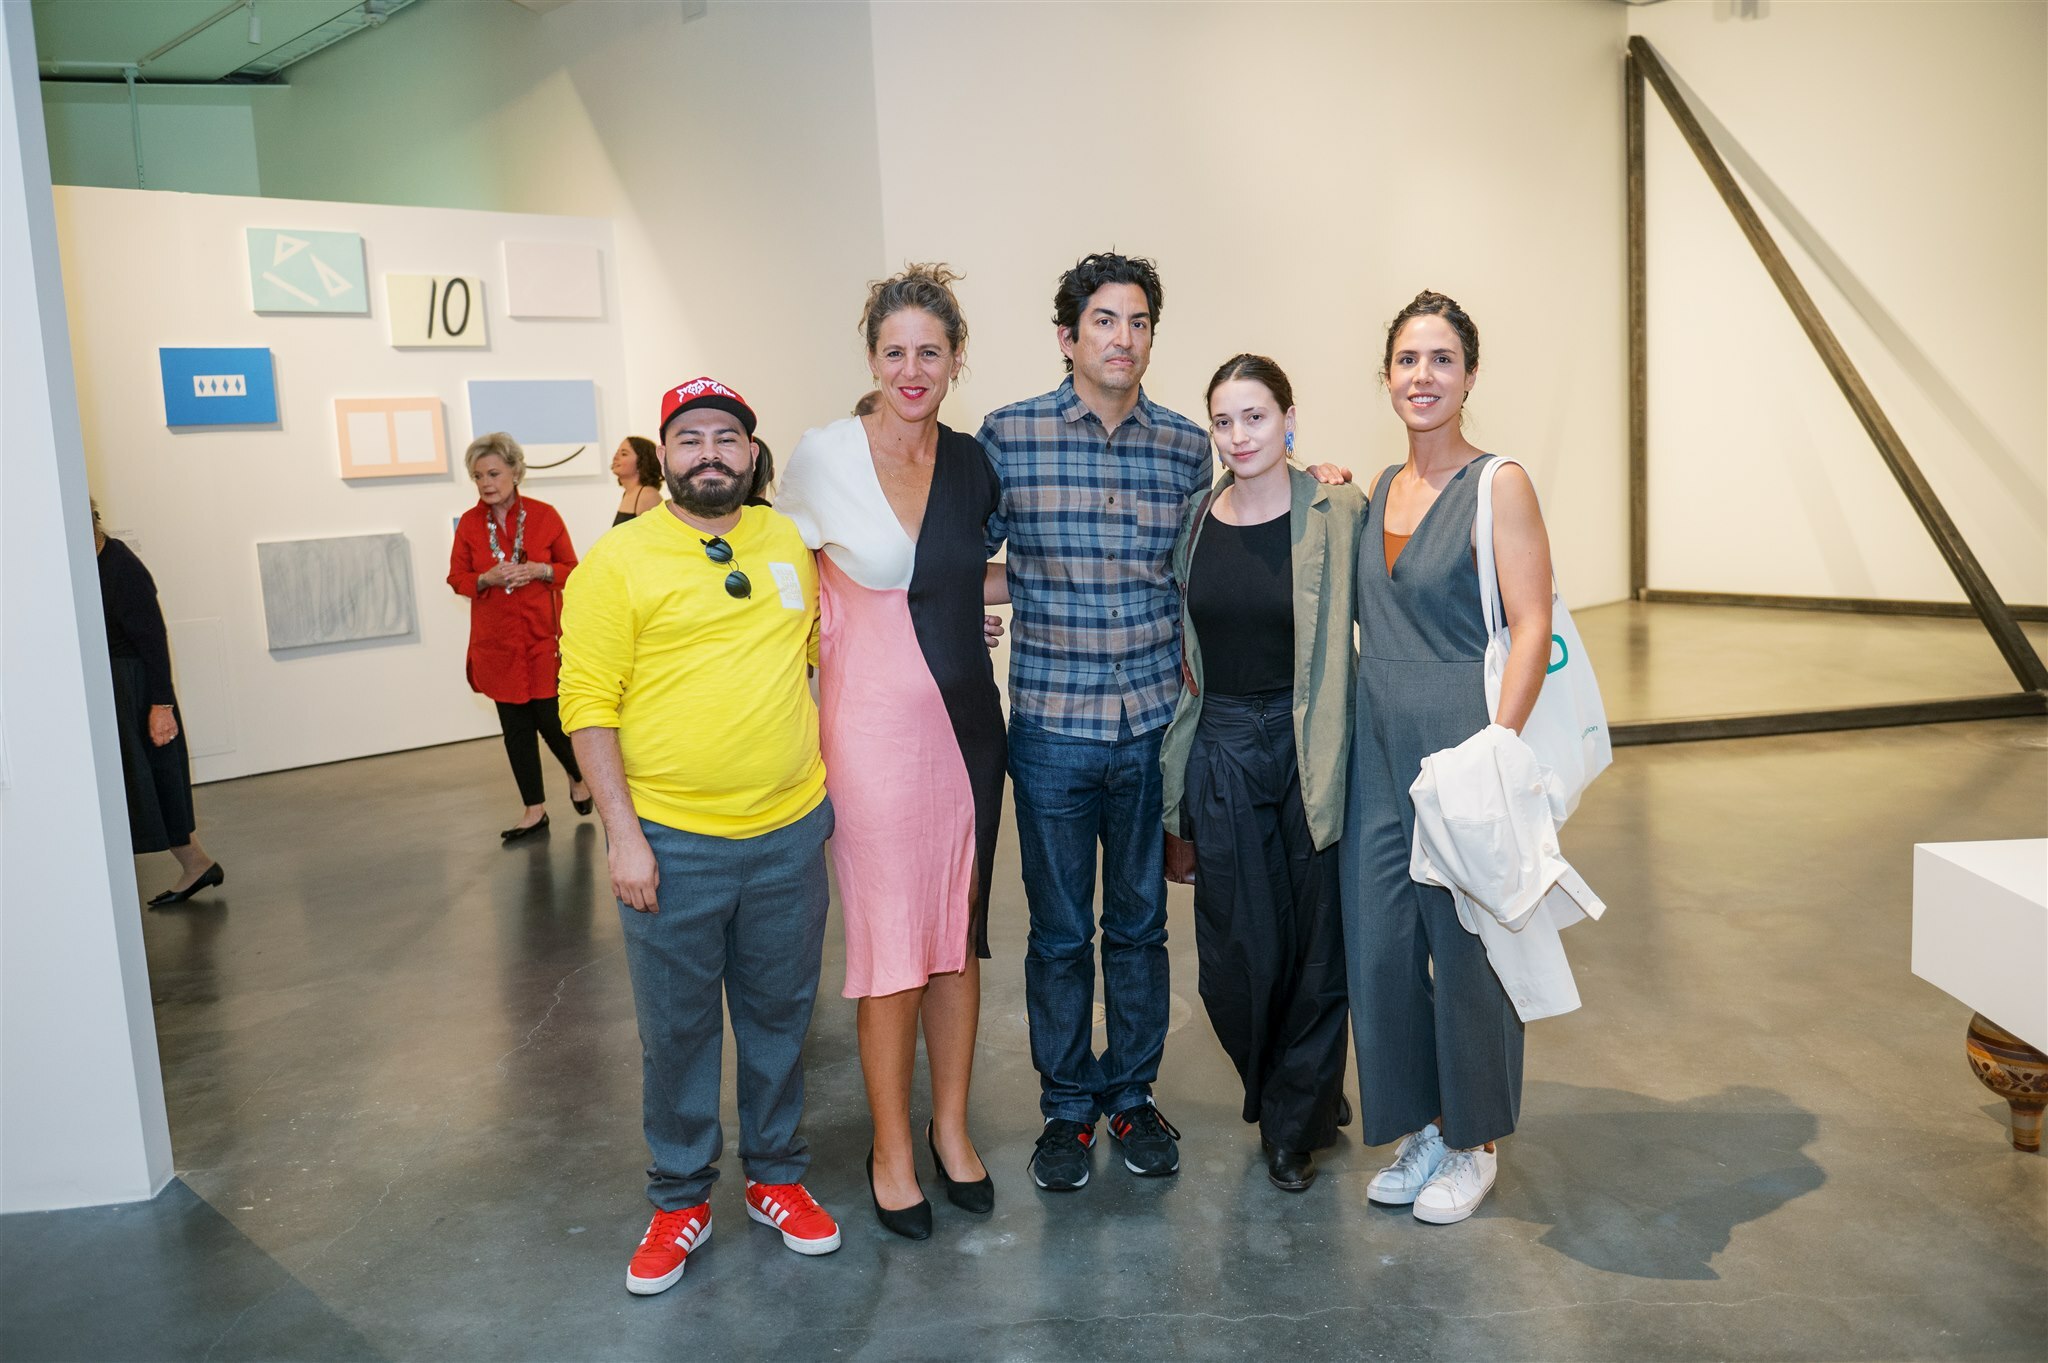 Five people stand in an art gallery looking at the camera. From left to right, there is a man in a yellow shirt, woman in a pink, black and white dress, man in a checkered button-up and two women in grey and black.